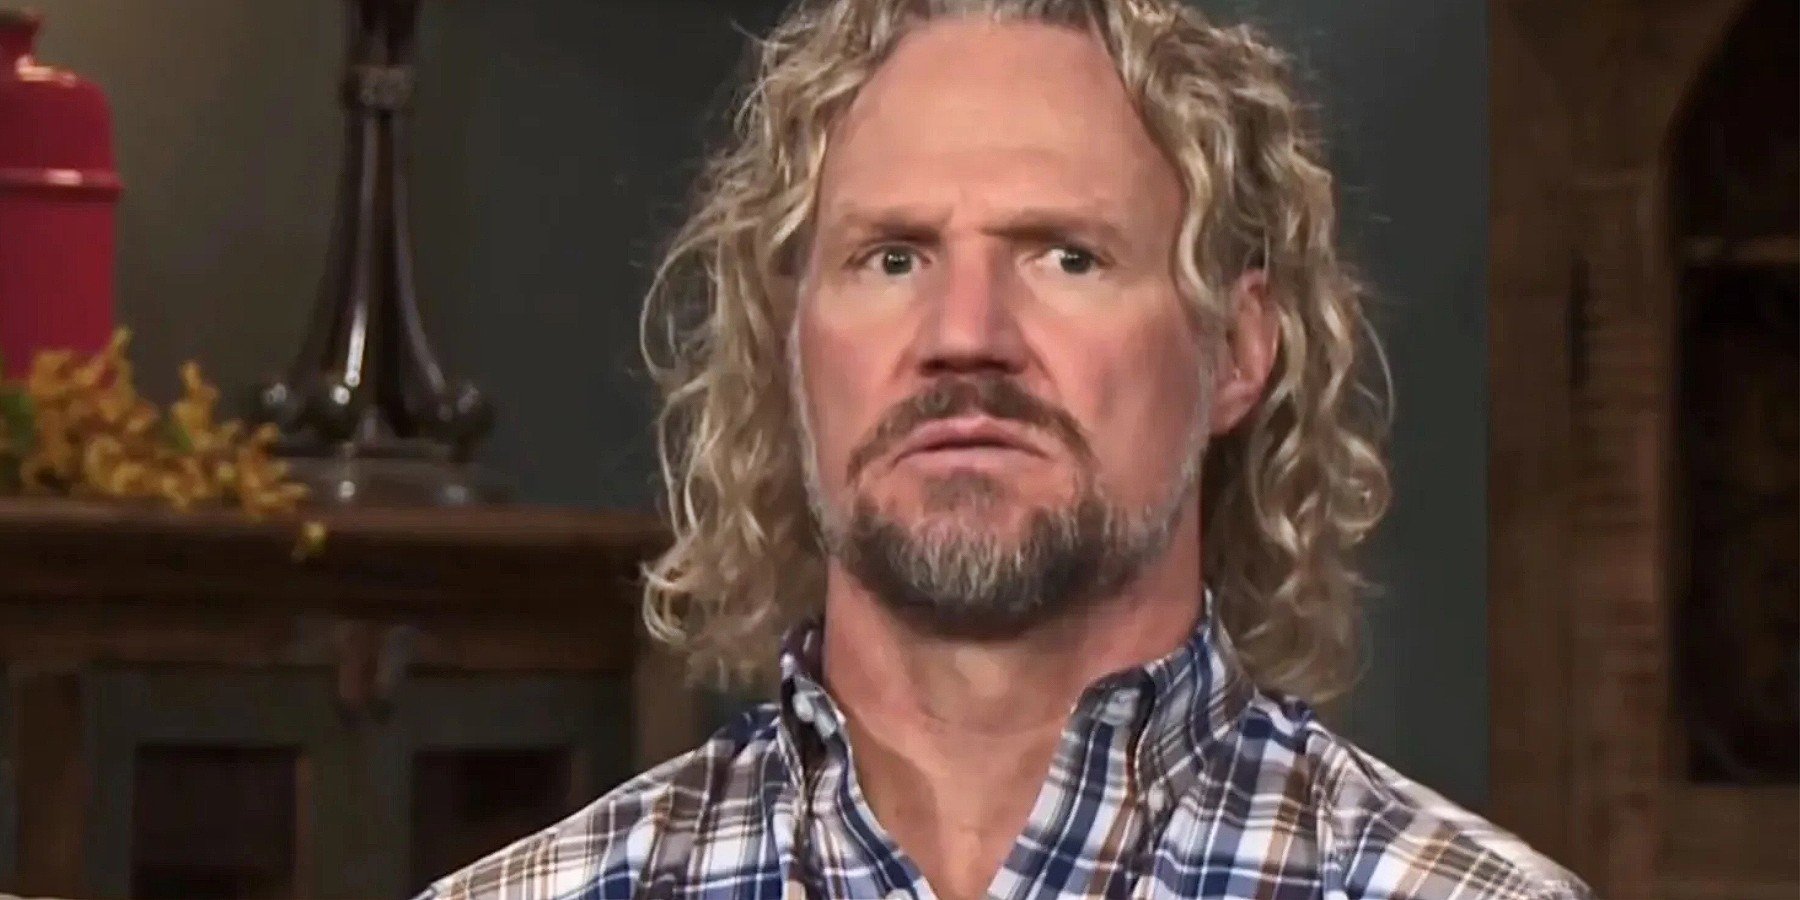 Kody Brown is seated in a confessional interview for TLC's 'Sister Wives.'